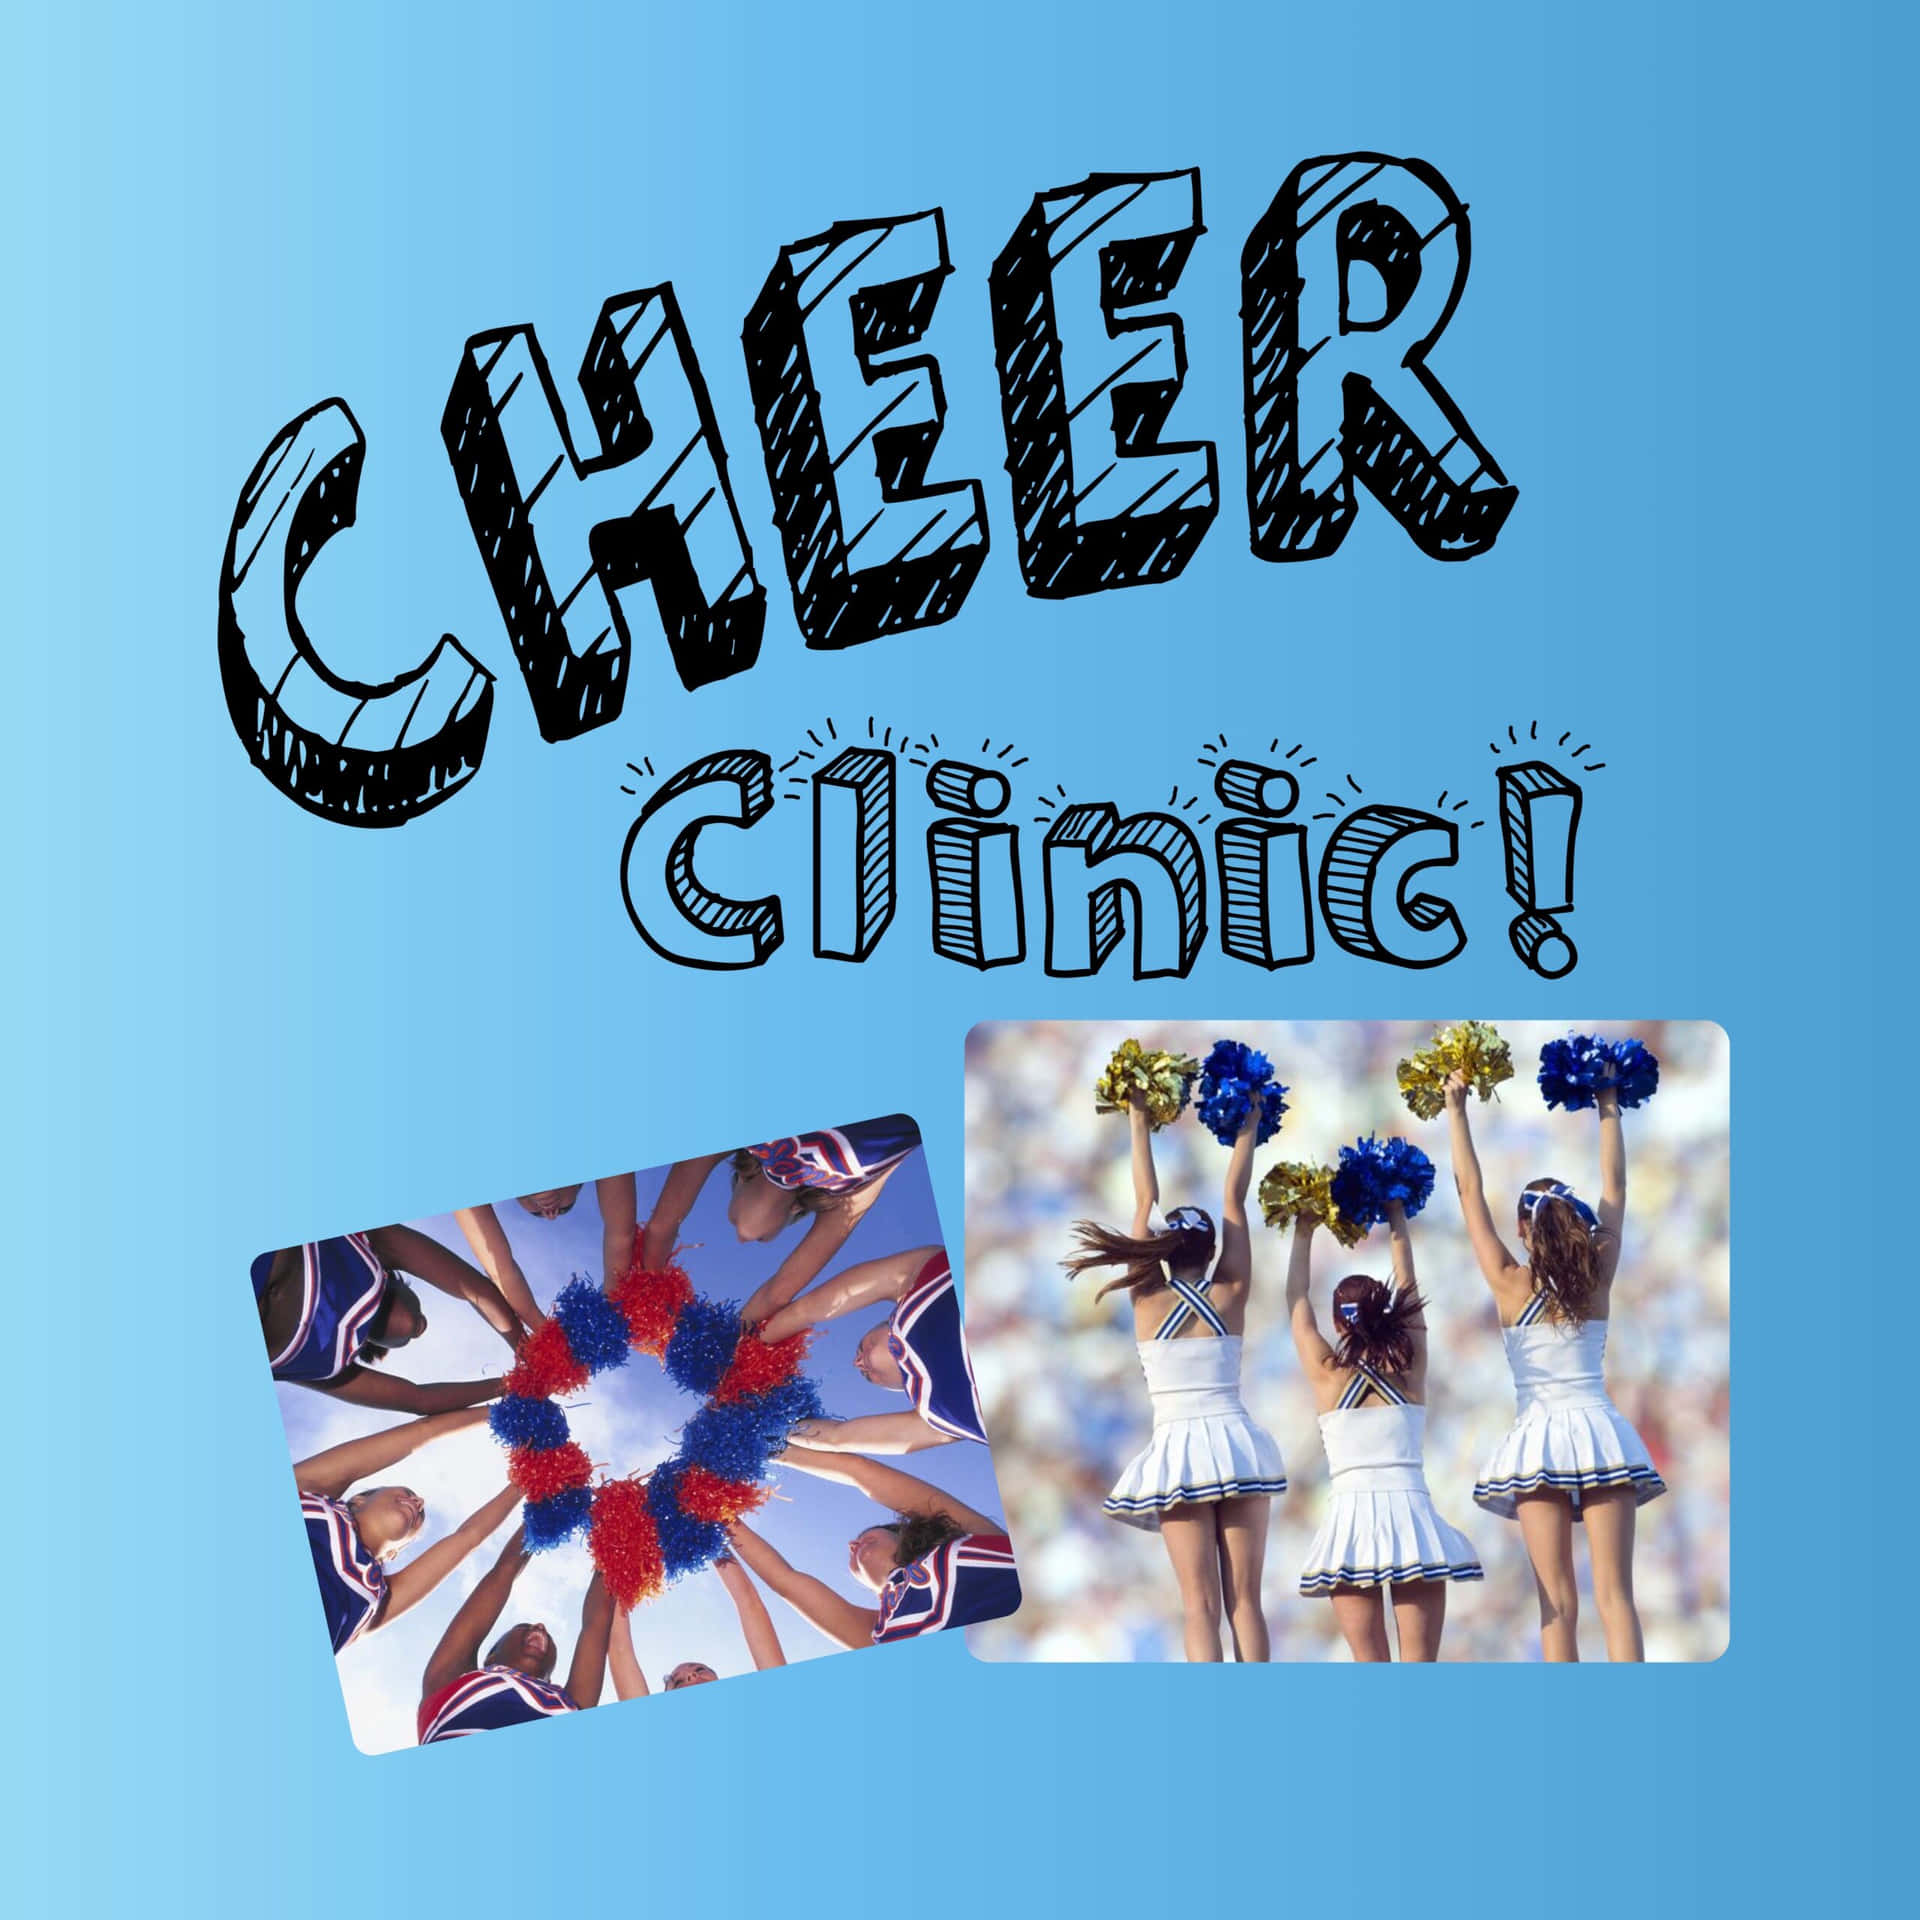 Cheer_ Clinic_ Promotion Wallpaper